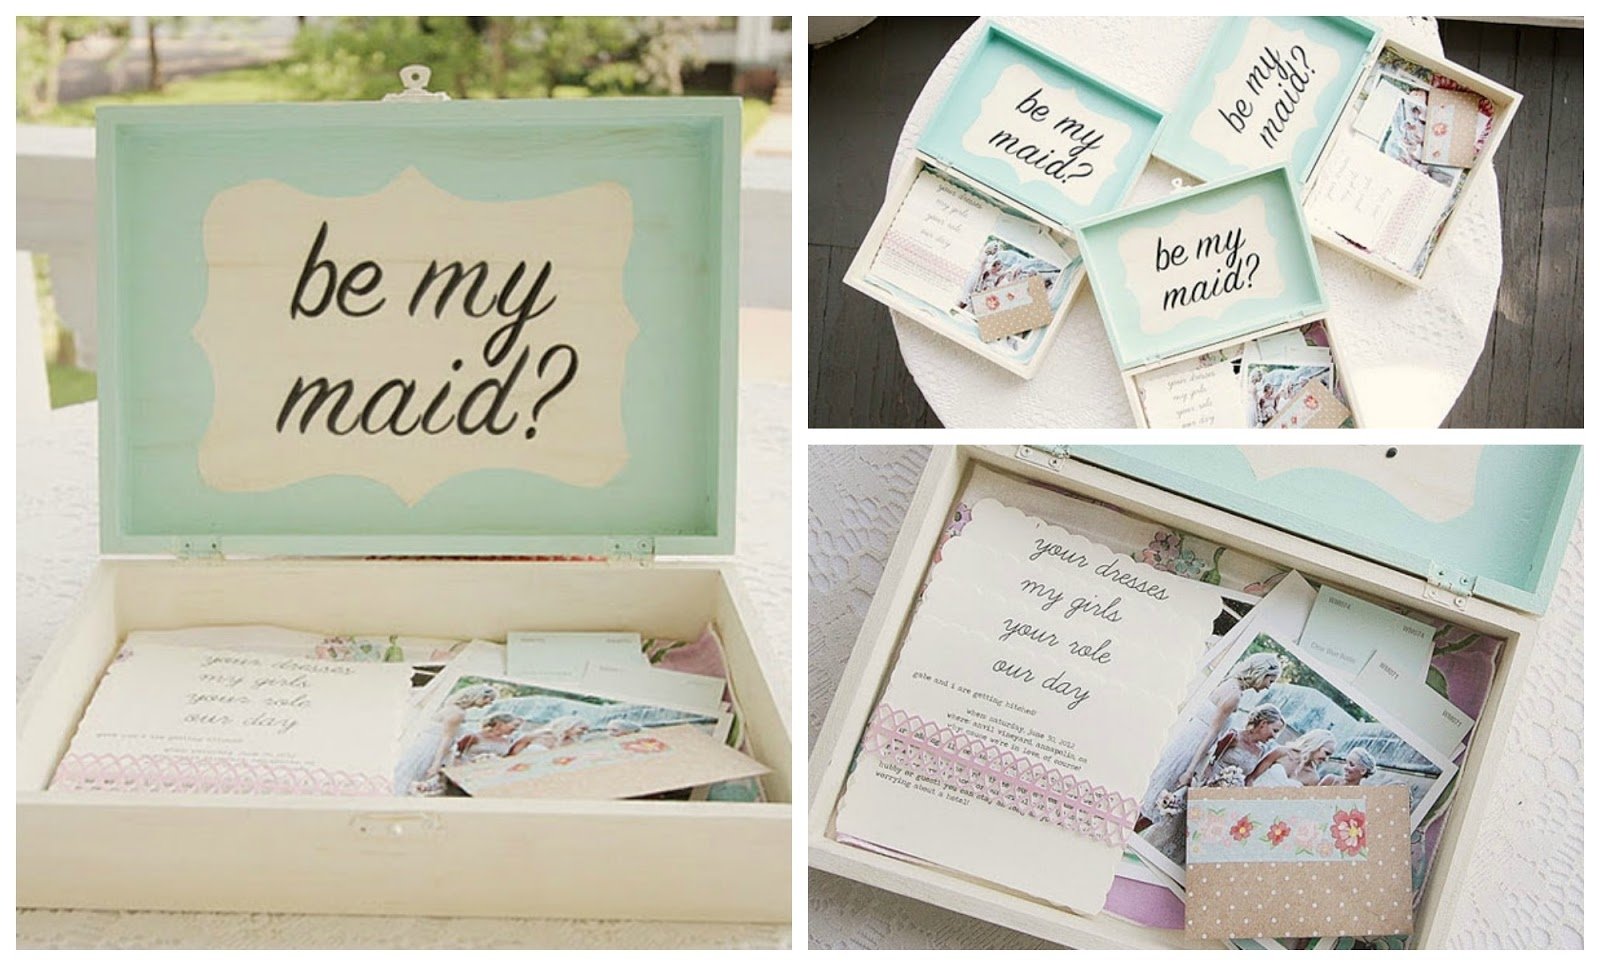 10 Great Will You Be My Bridesmaid Ideas 10 pretty perfect will you be my bridesmaid ideas aisle perfect 1 2022